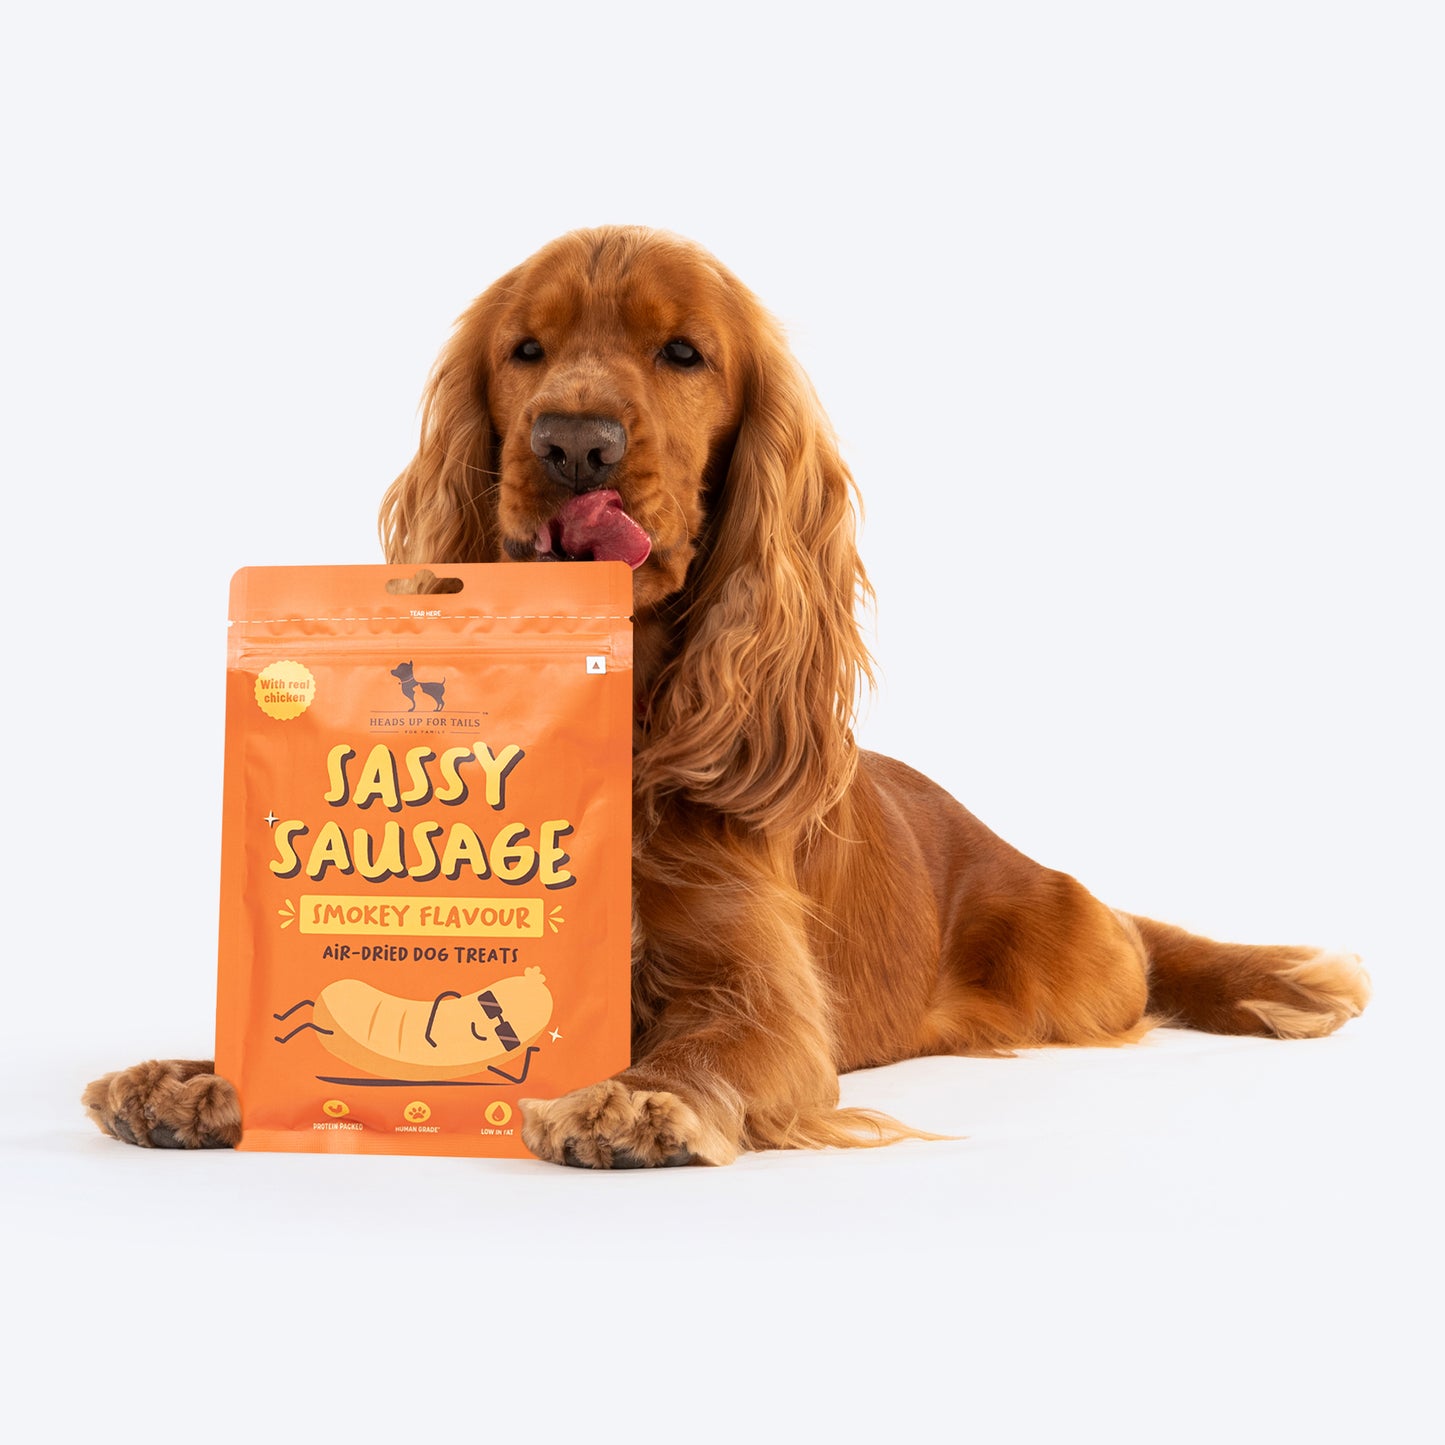 HUFT Sassy Sausage Smokey With Real Chicken Air-Dried Dog Treats - 100 g - Heads Up For Tails